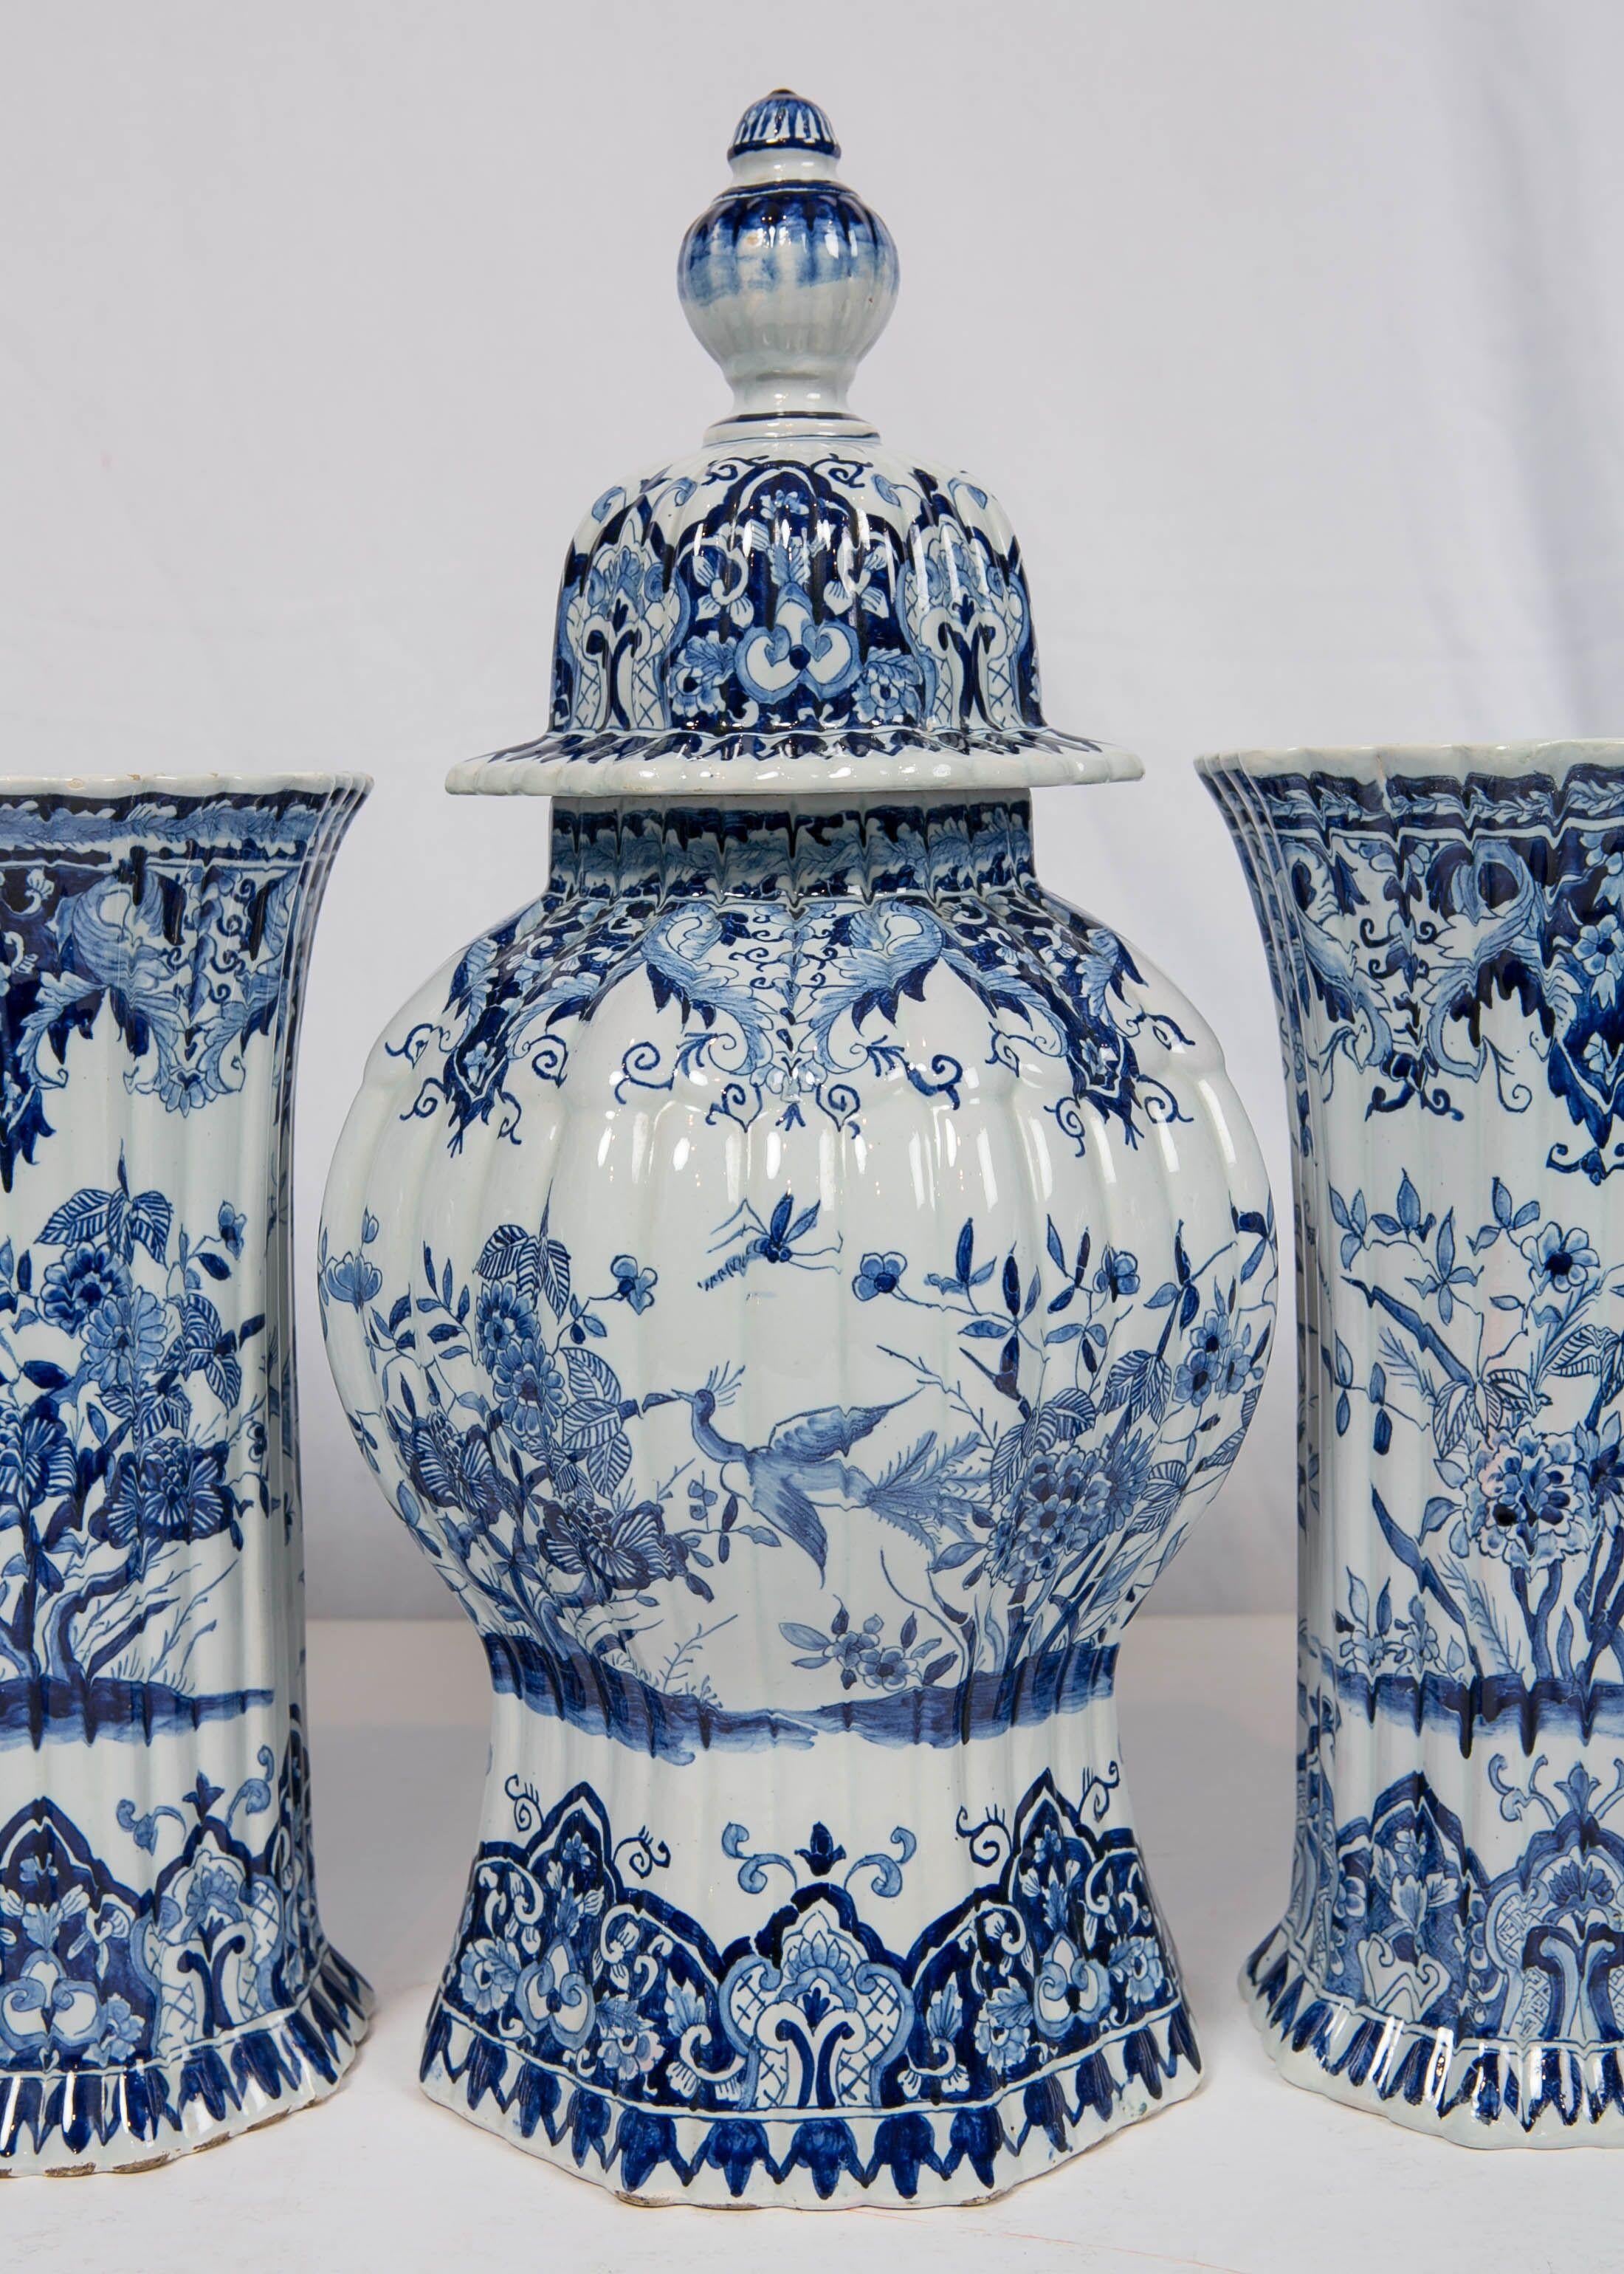 A five-piece French blue and white garniture in the style of delft made by the highly esteemed French company Samson et Cie, in the first quarter of the 20th century. The vases are octagonal, and ribbed. The scene on the vases shows a bird in